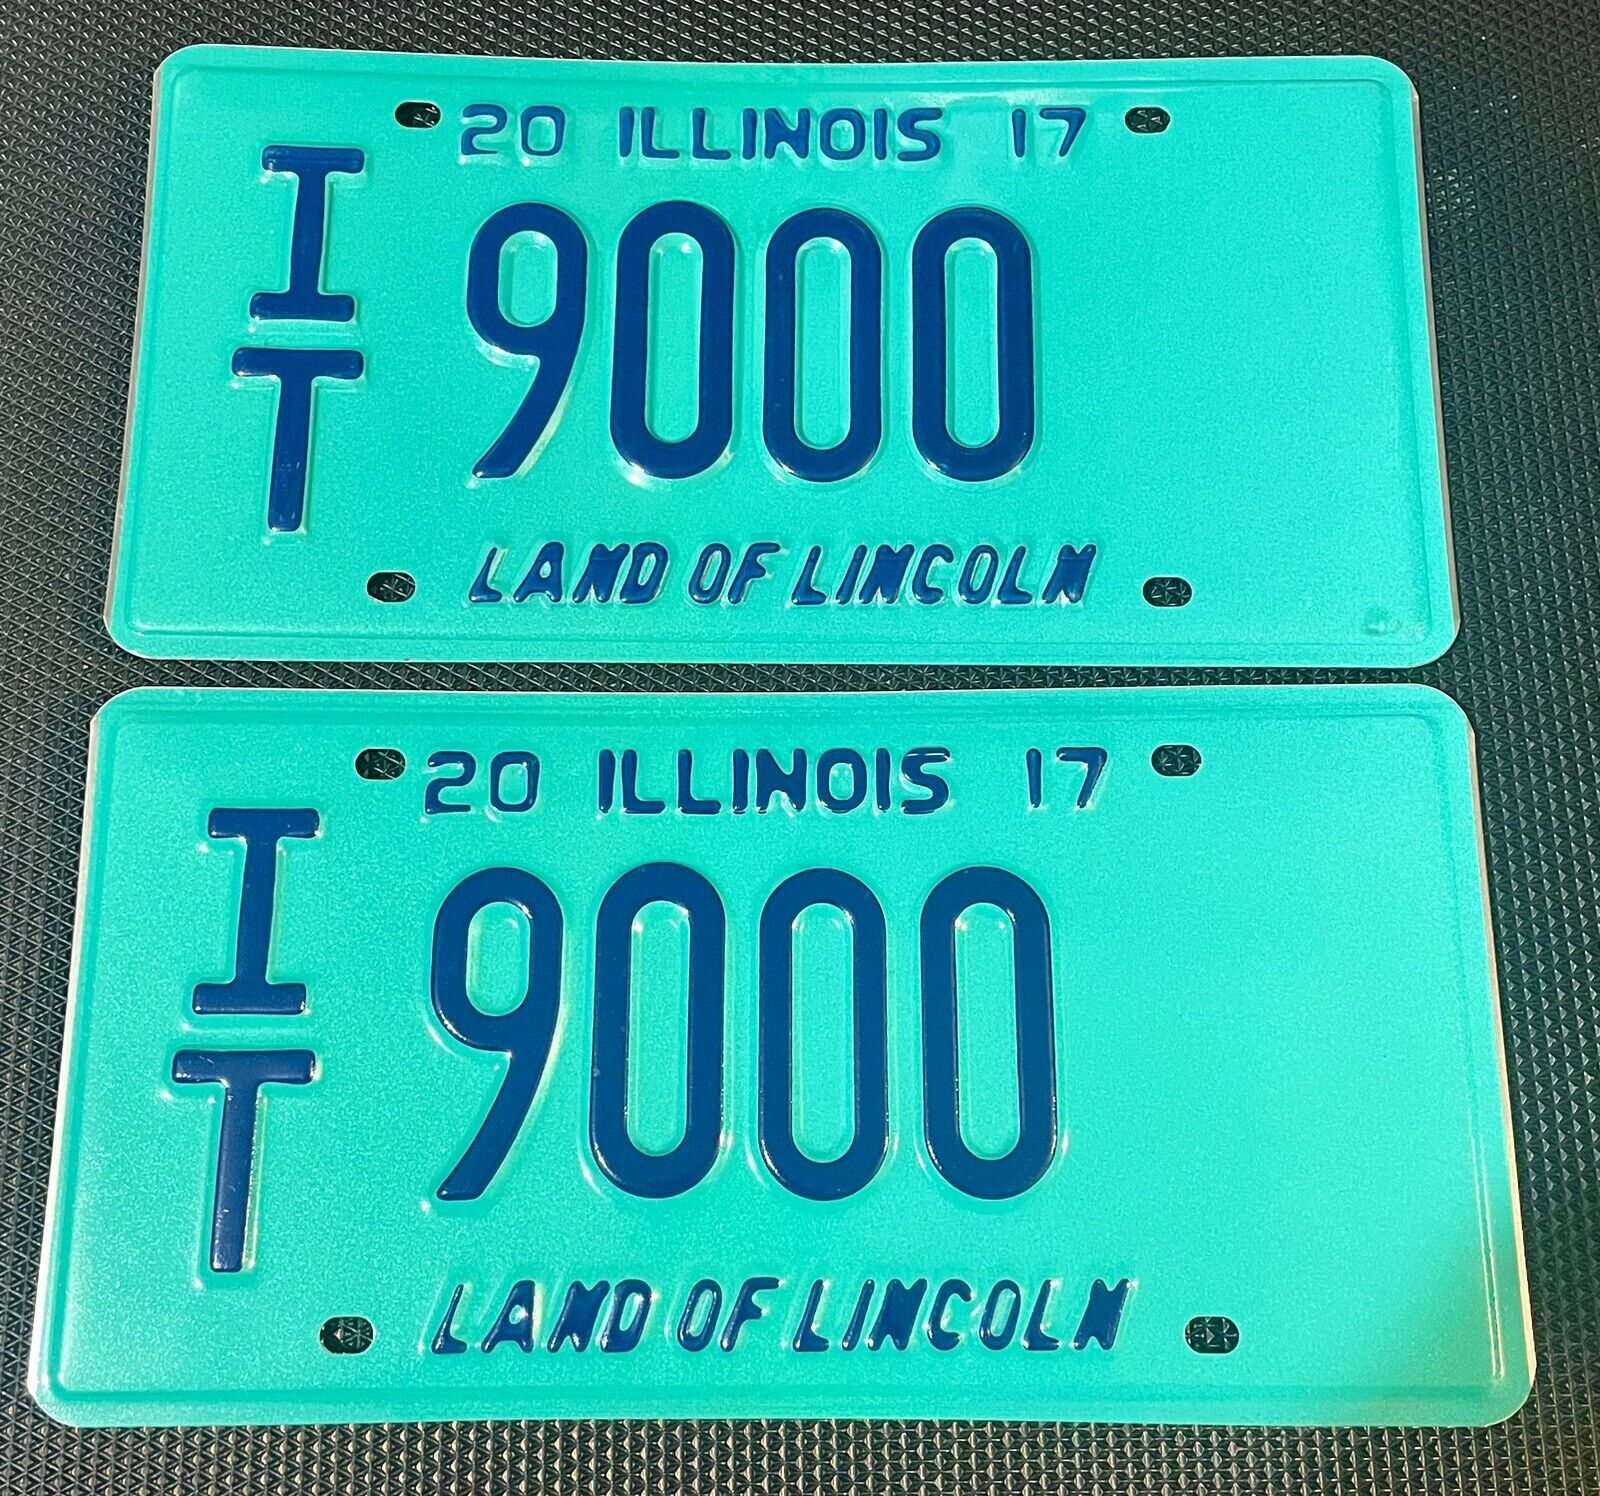 ILLINOIS PAIR OF LICENSE PLATES 2017 IN TRANSIT IT 9000 Low Number